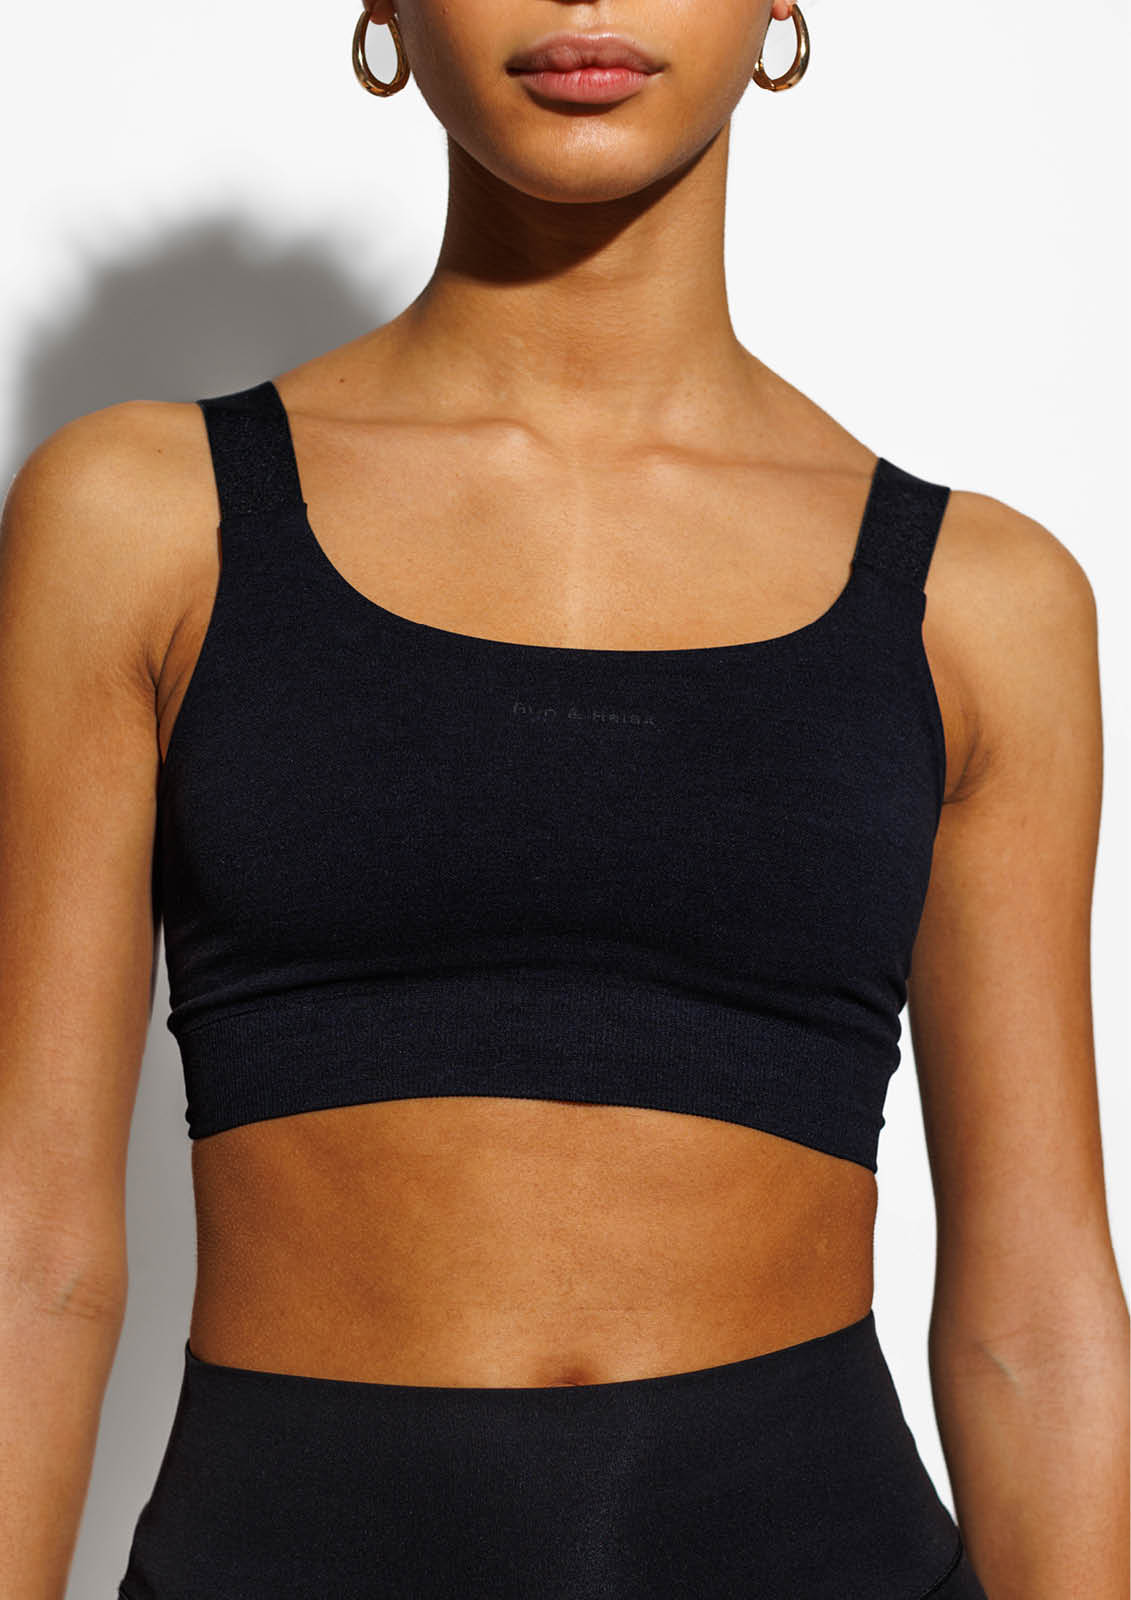 RYRJJ Women's Y Back Sports Bra Strappy Seamless Padded Workout Tops Solid  Soft Comfy Low Impact Support Workout Yoga Bras(Black,XL)